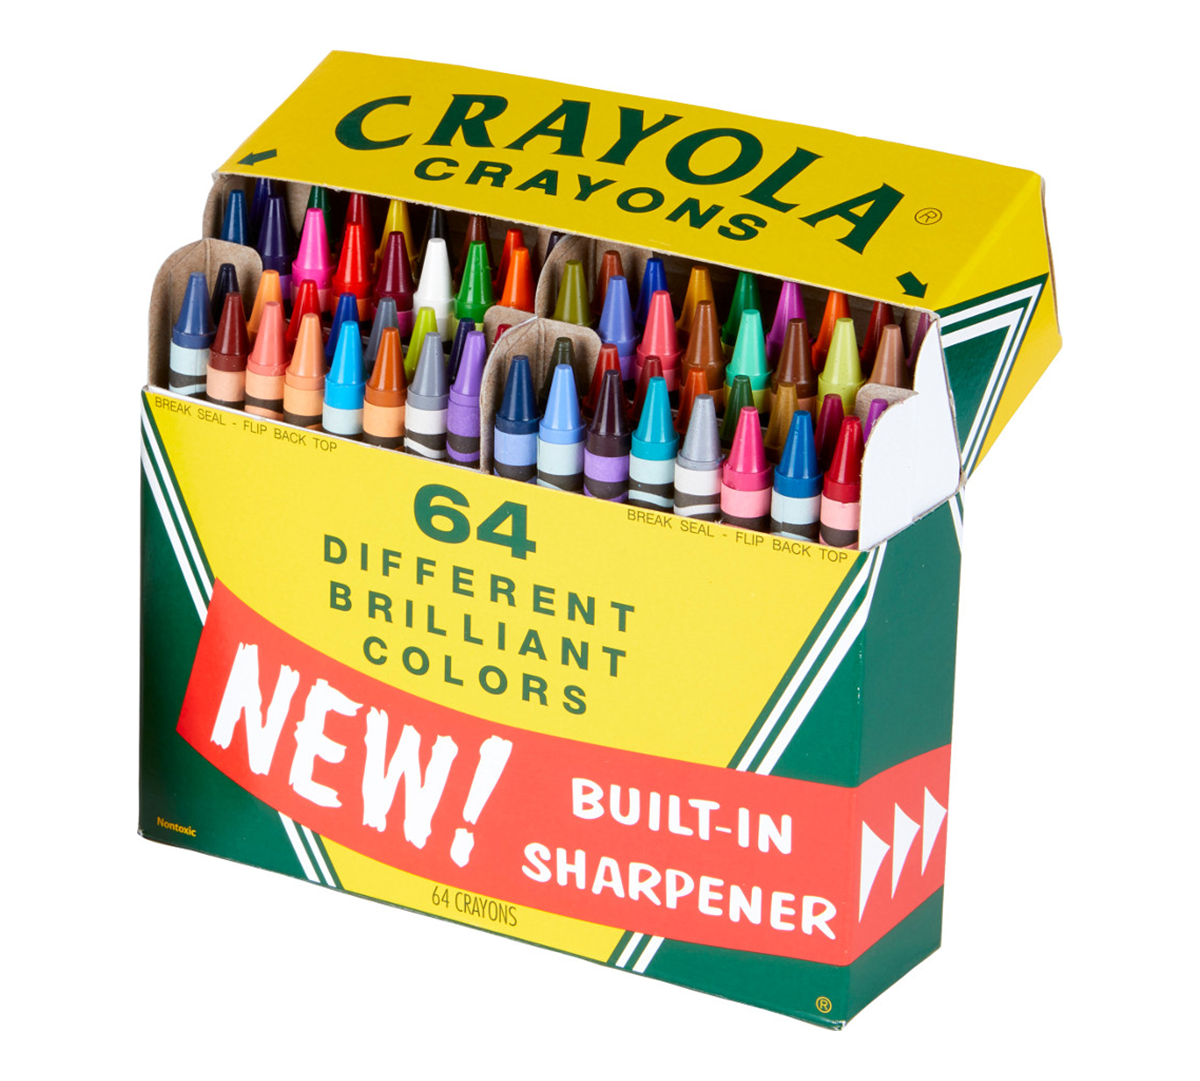 Sealed Crayola Crayons Box with Built-In Sharpener 64 Count assorted colors 